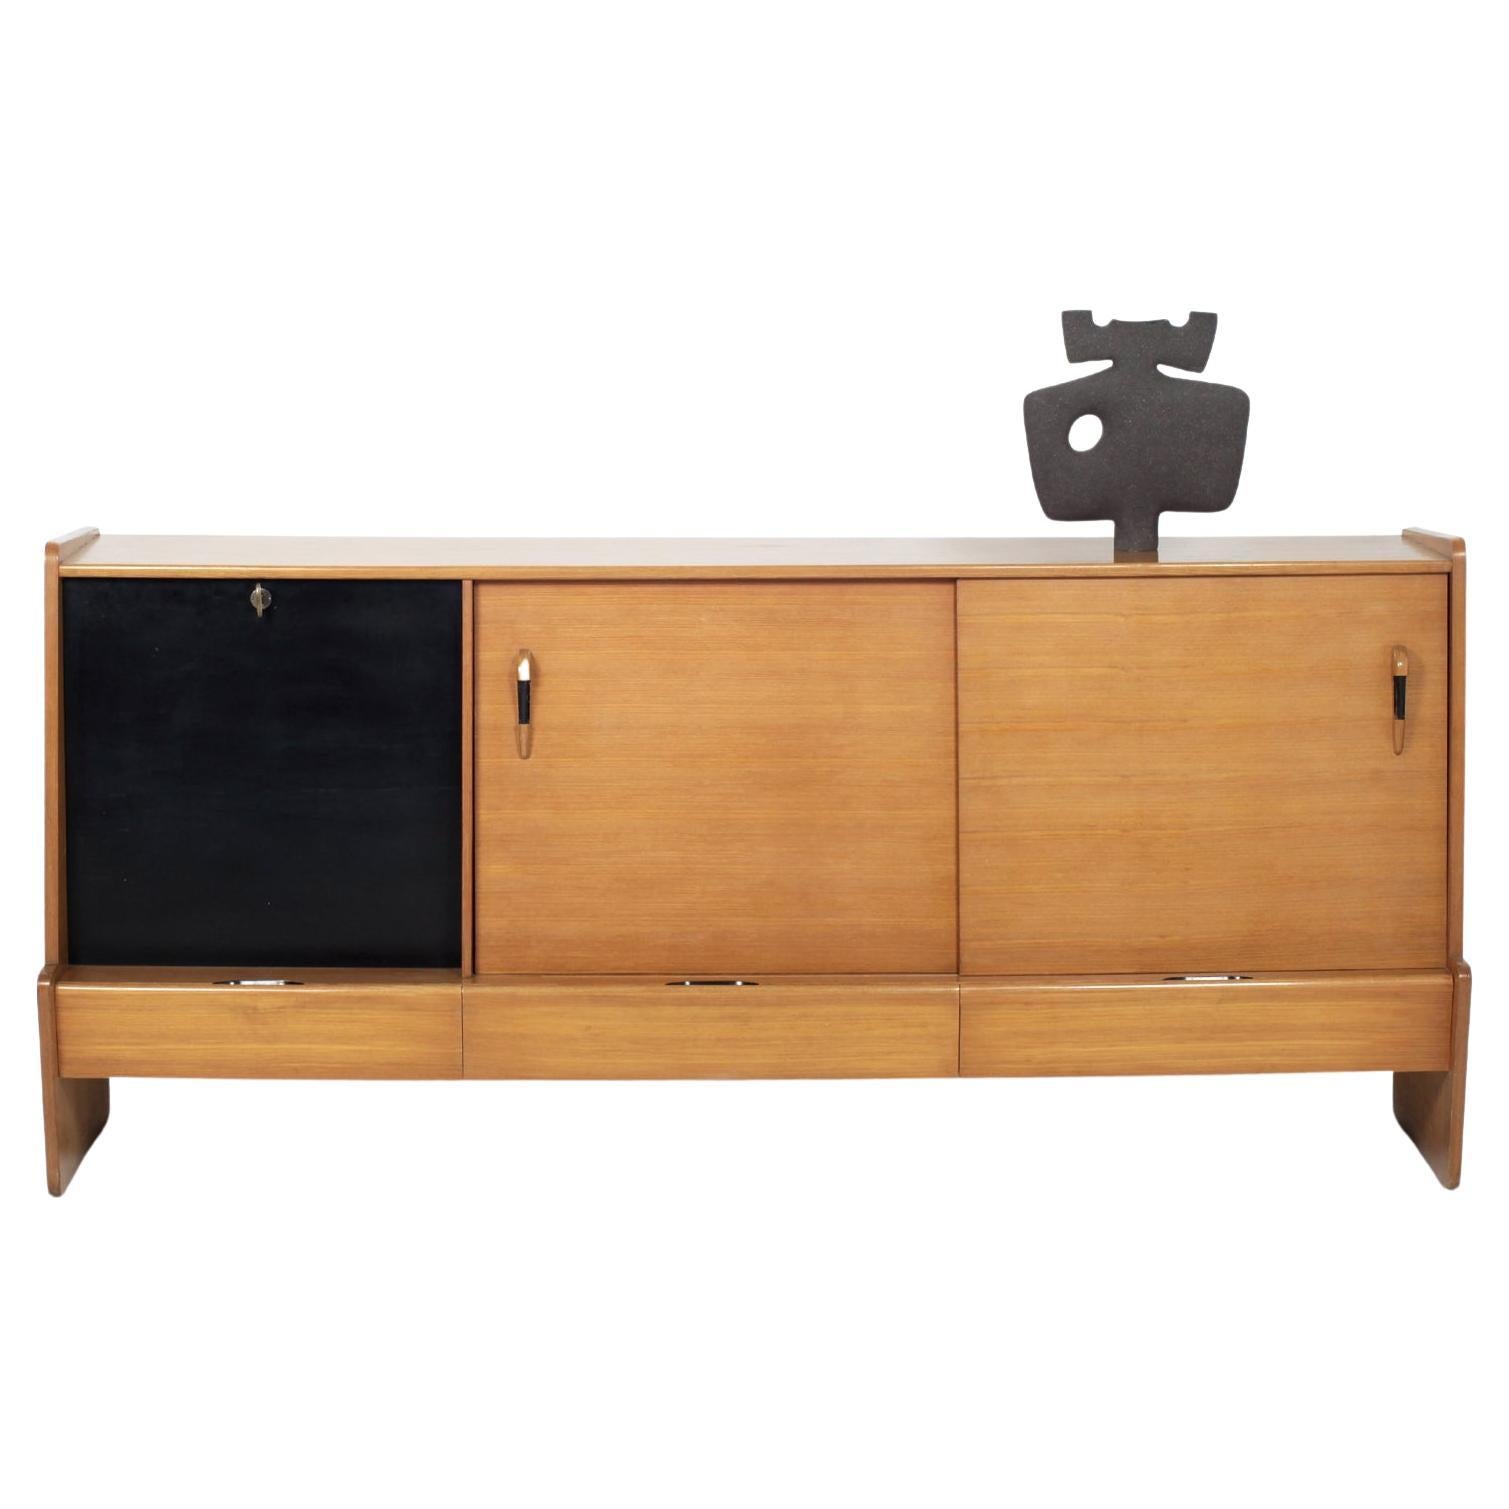 French modernist sideboard by Roche Bobois circa 1950
Two sliding doors with shelves
Three drawers and a bar
Nice blackened wood details.